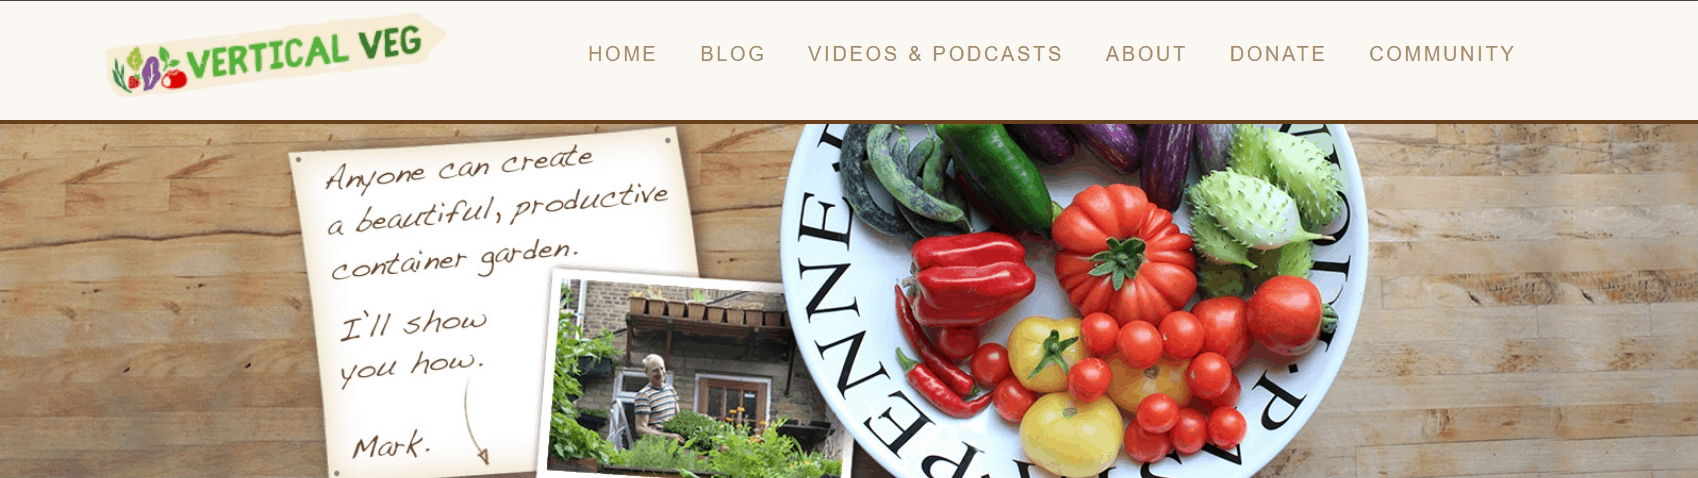 Vertical Veg blog banner with a plate of vegetables